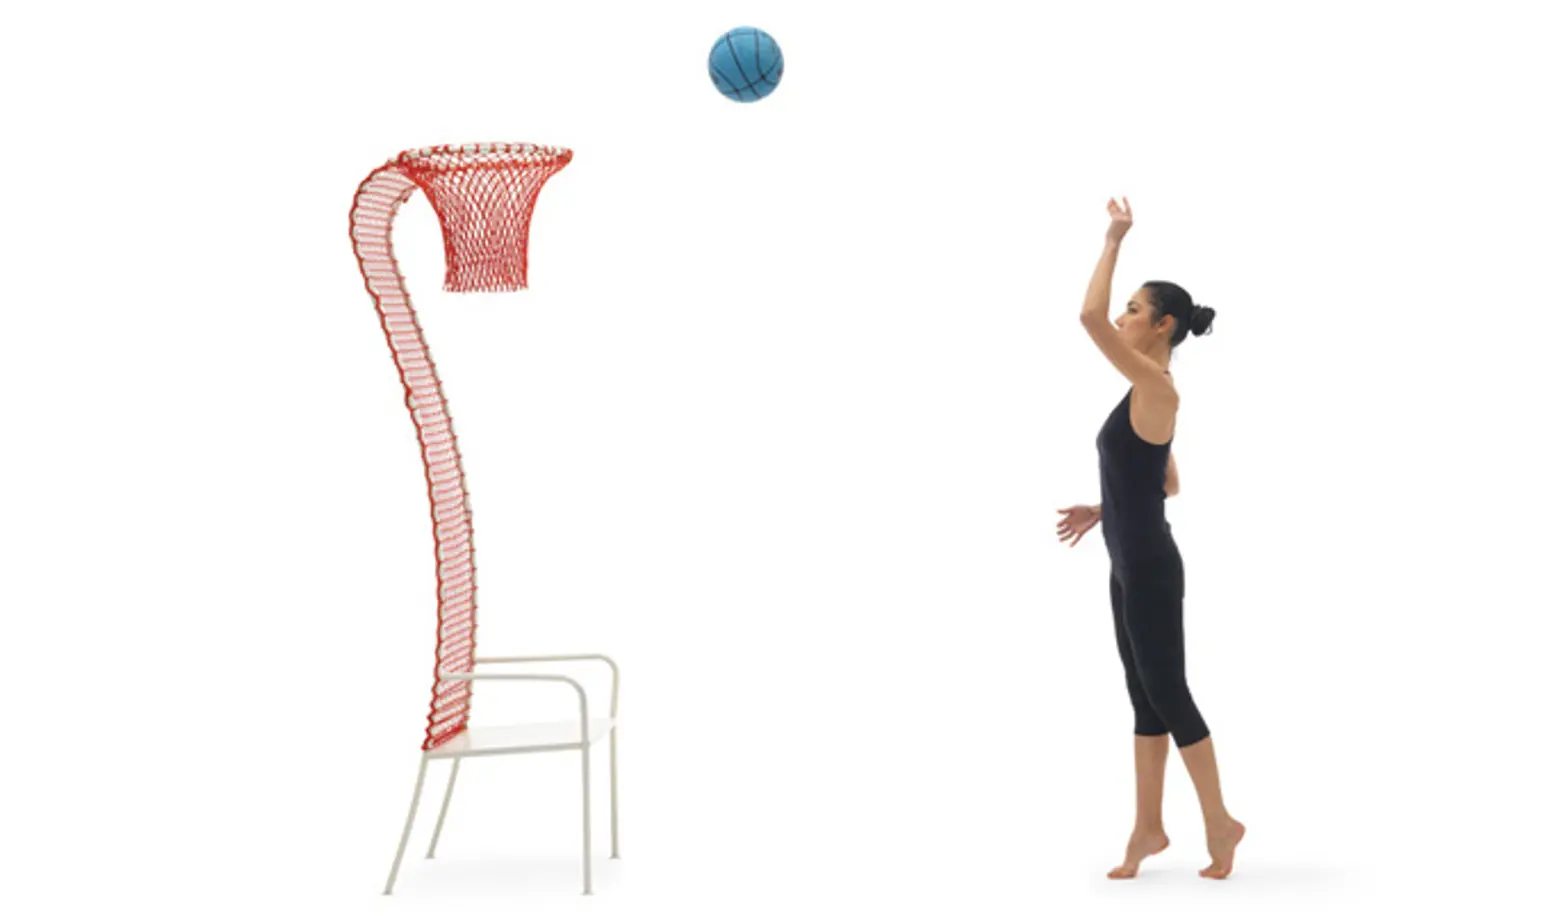 Everyday Office Furniture From Designer Emanuele Magini Doubles as Sports Equipment